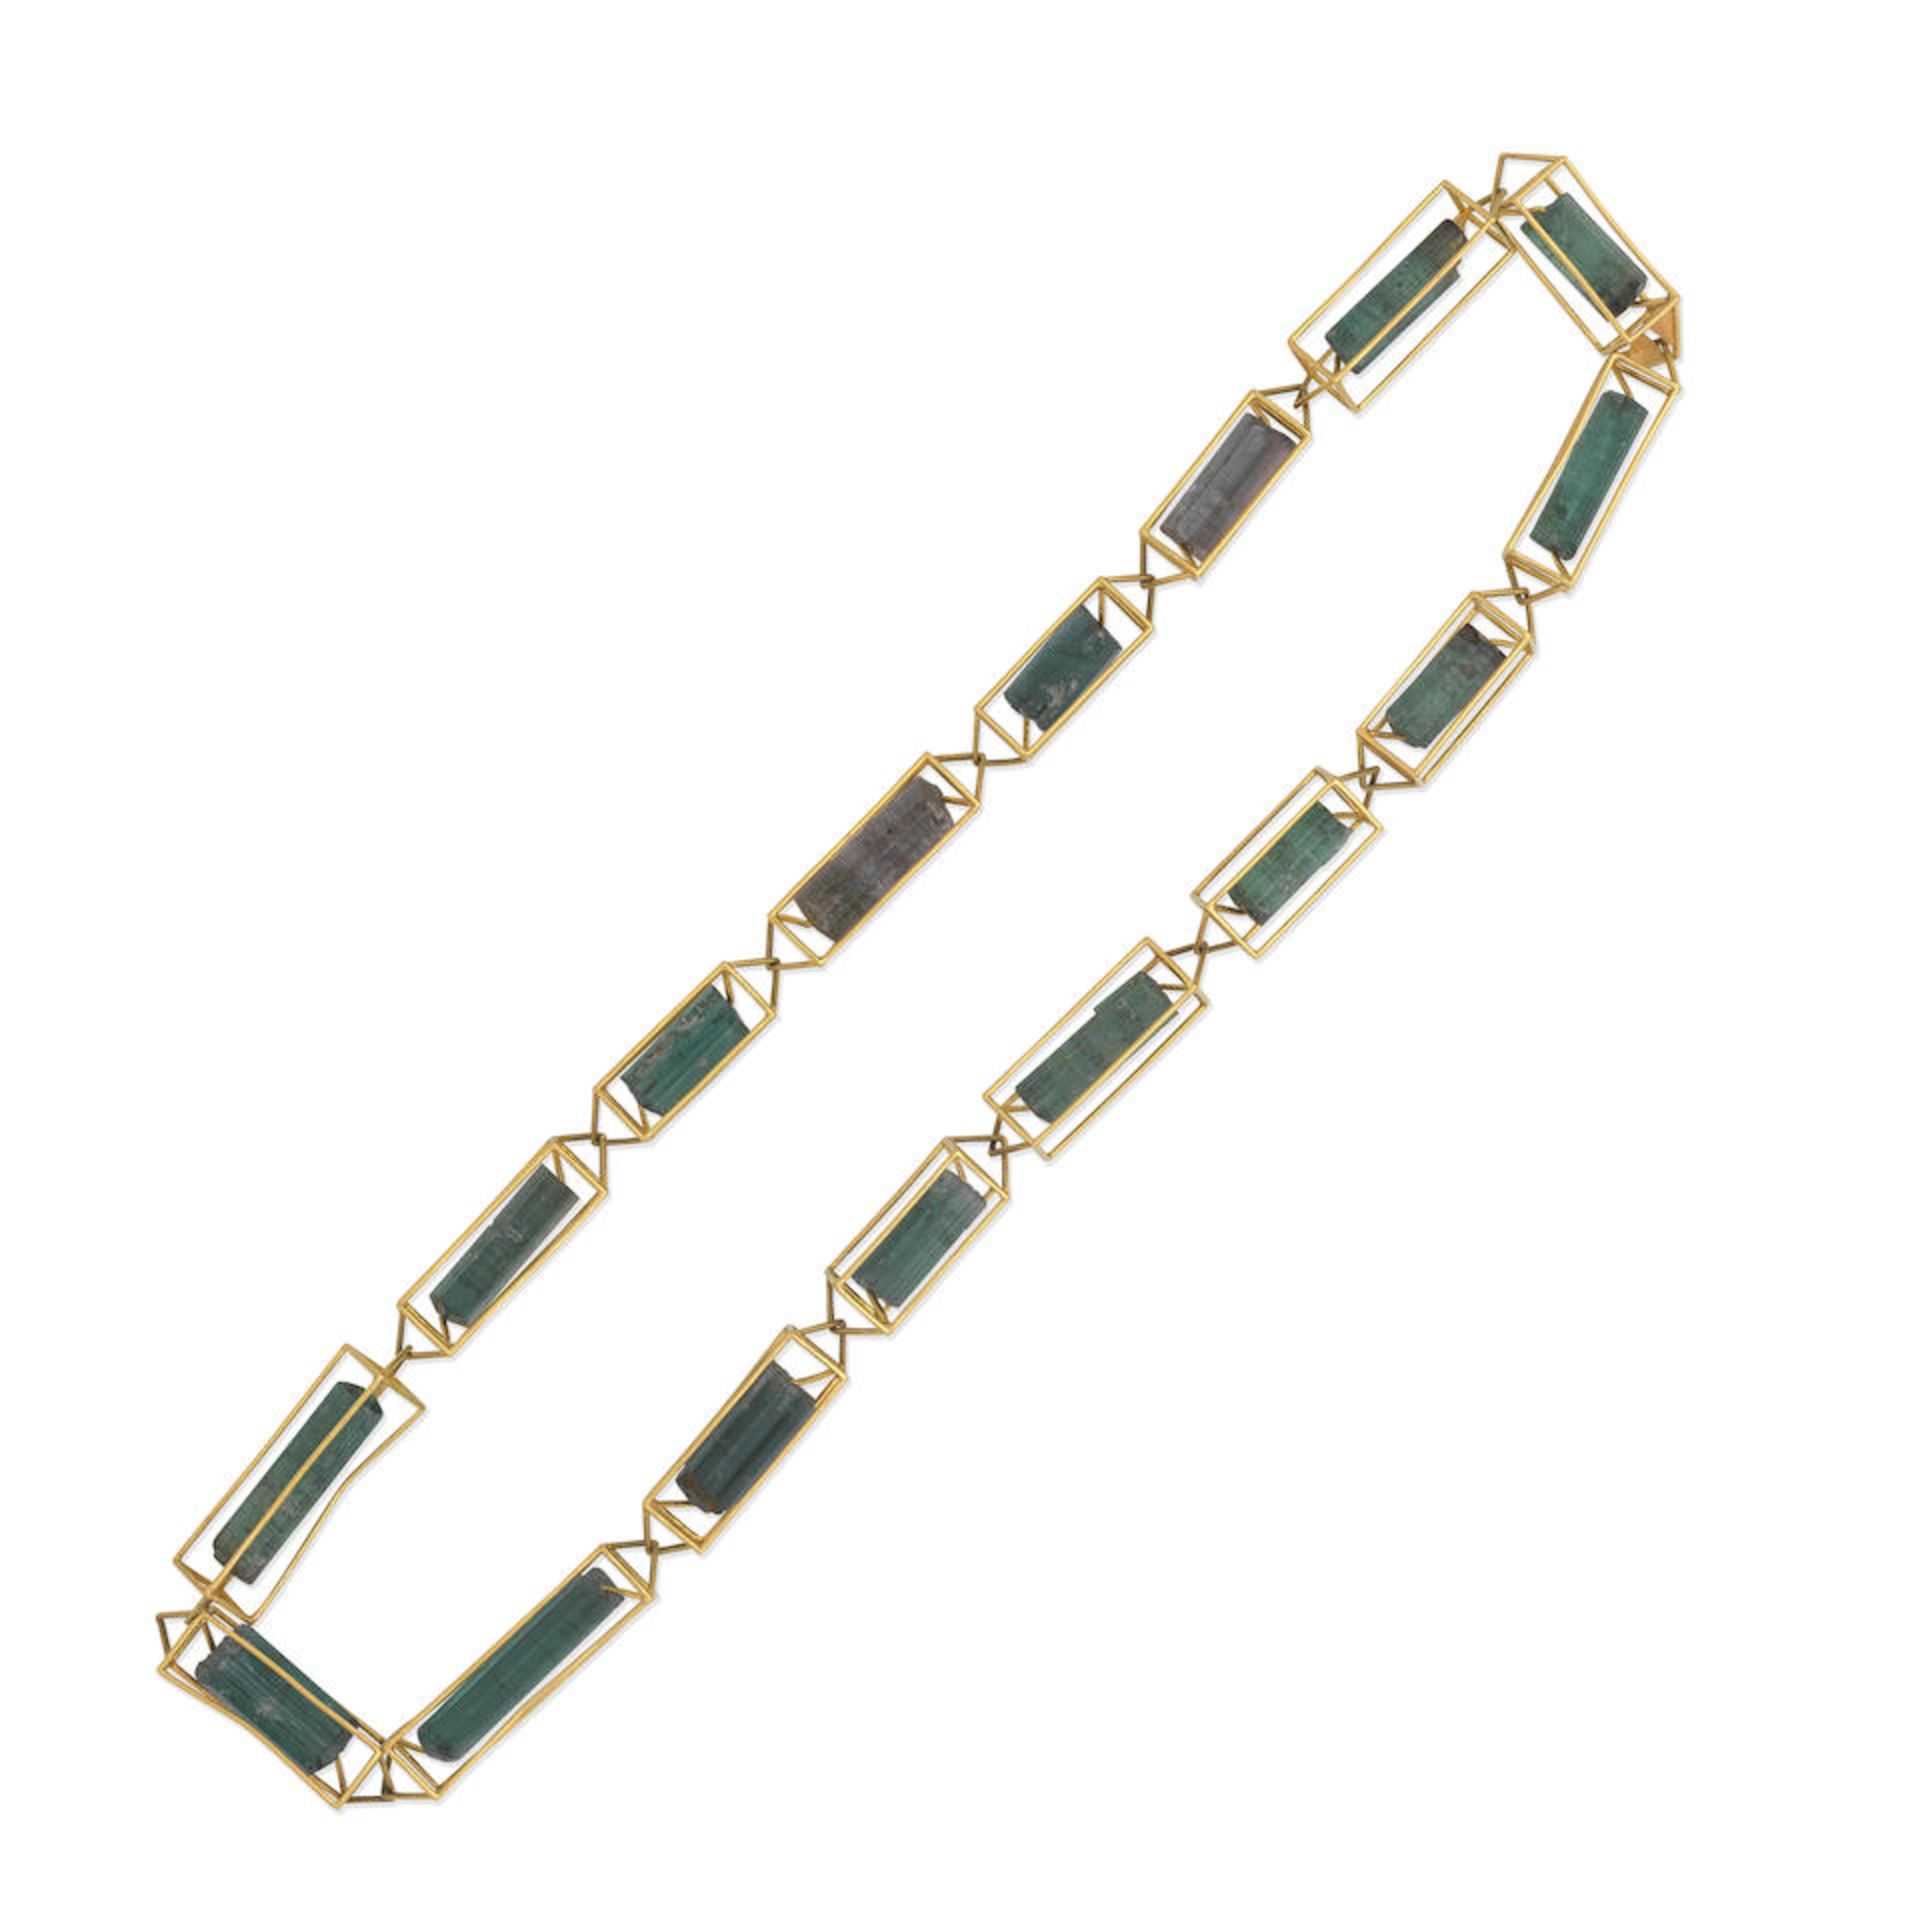 TOURMALINE CRYSTAL NECKLACE - Image 2 of 2